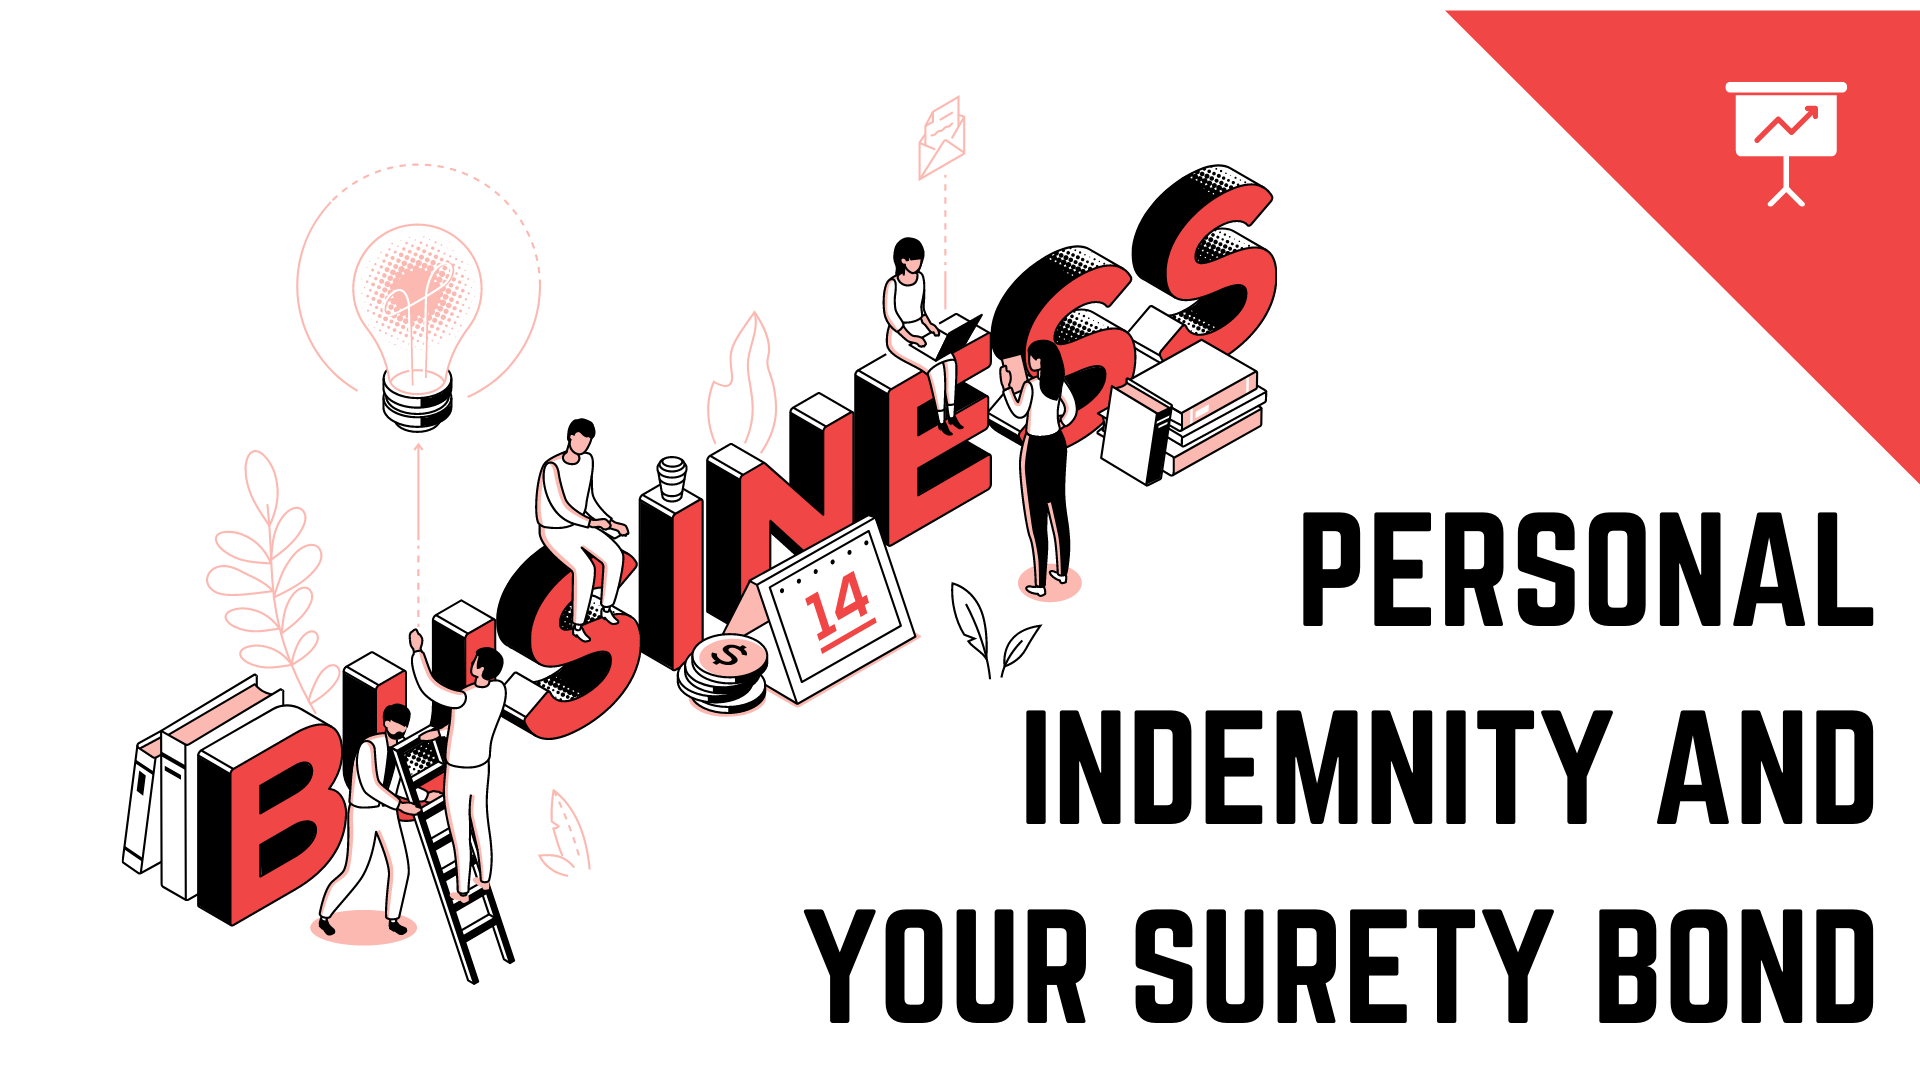 surety bond - What is an indemnity bond with surety - animated business presentation